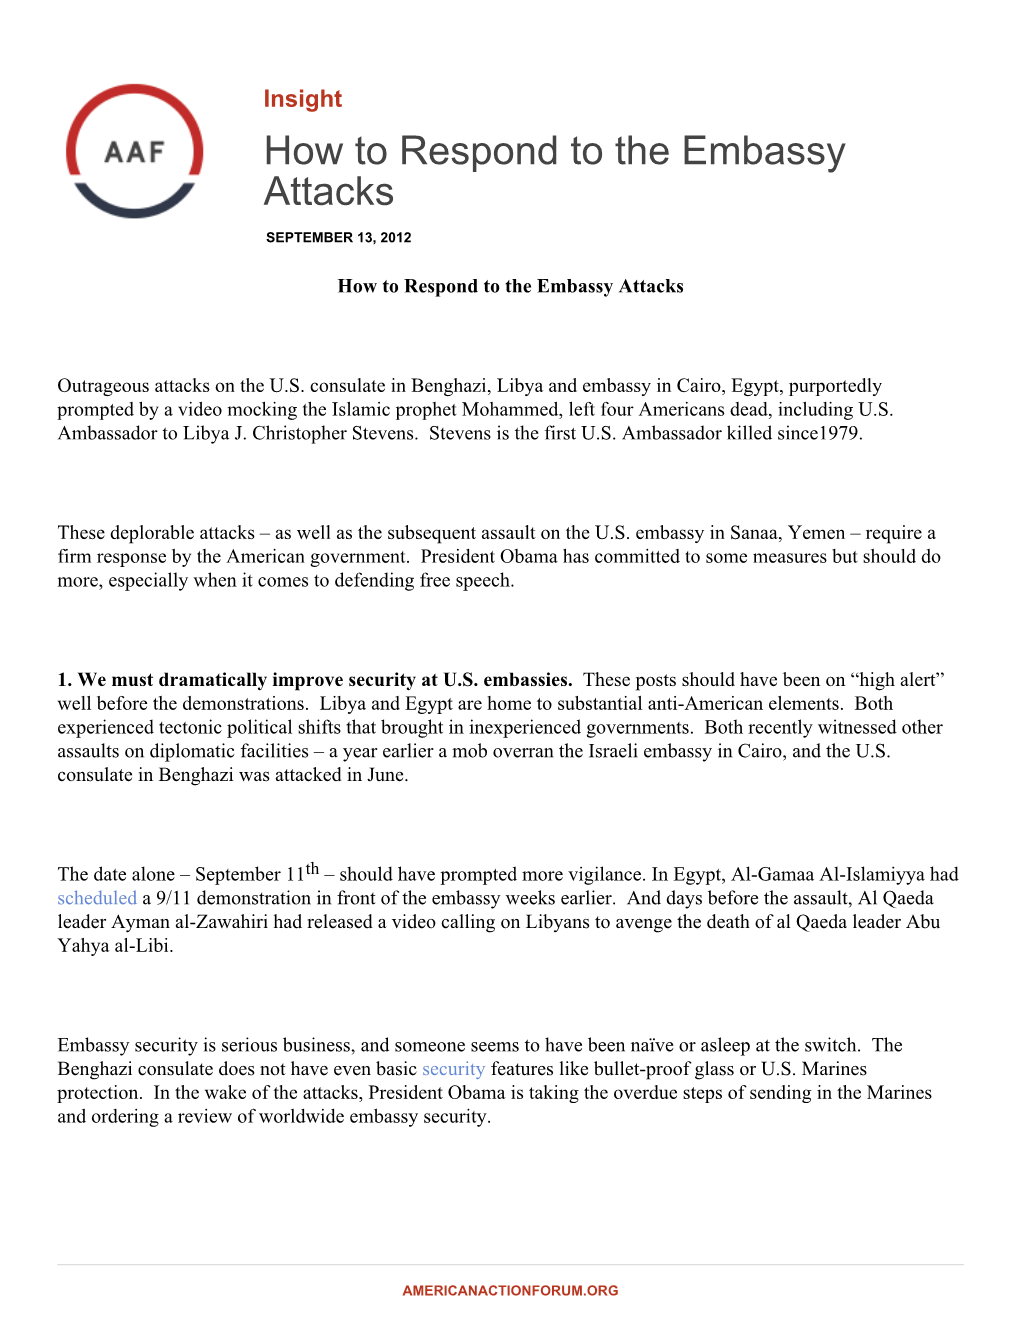 How to Respond to the Embassy Attacks